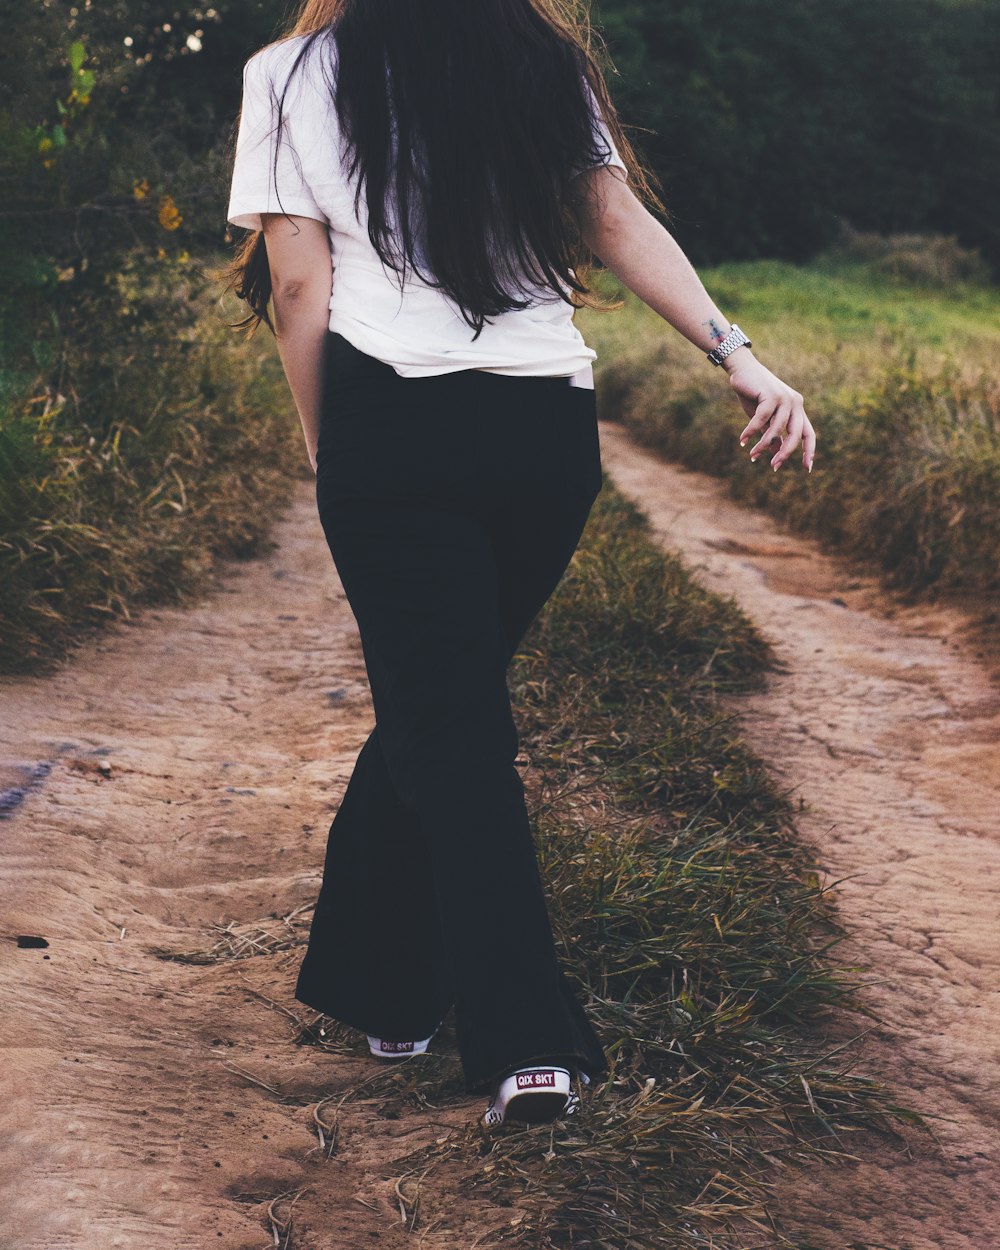 a person walking on a dirt path